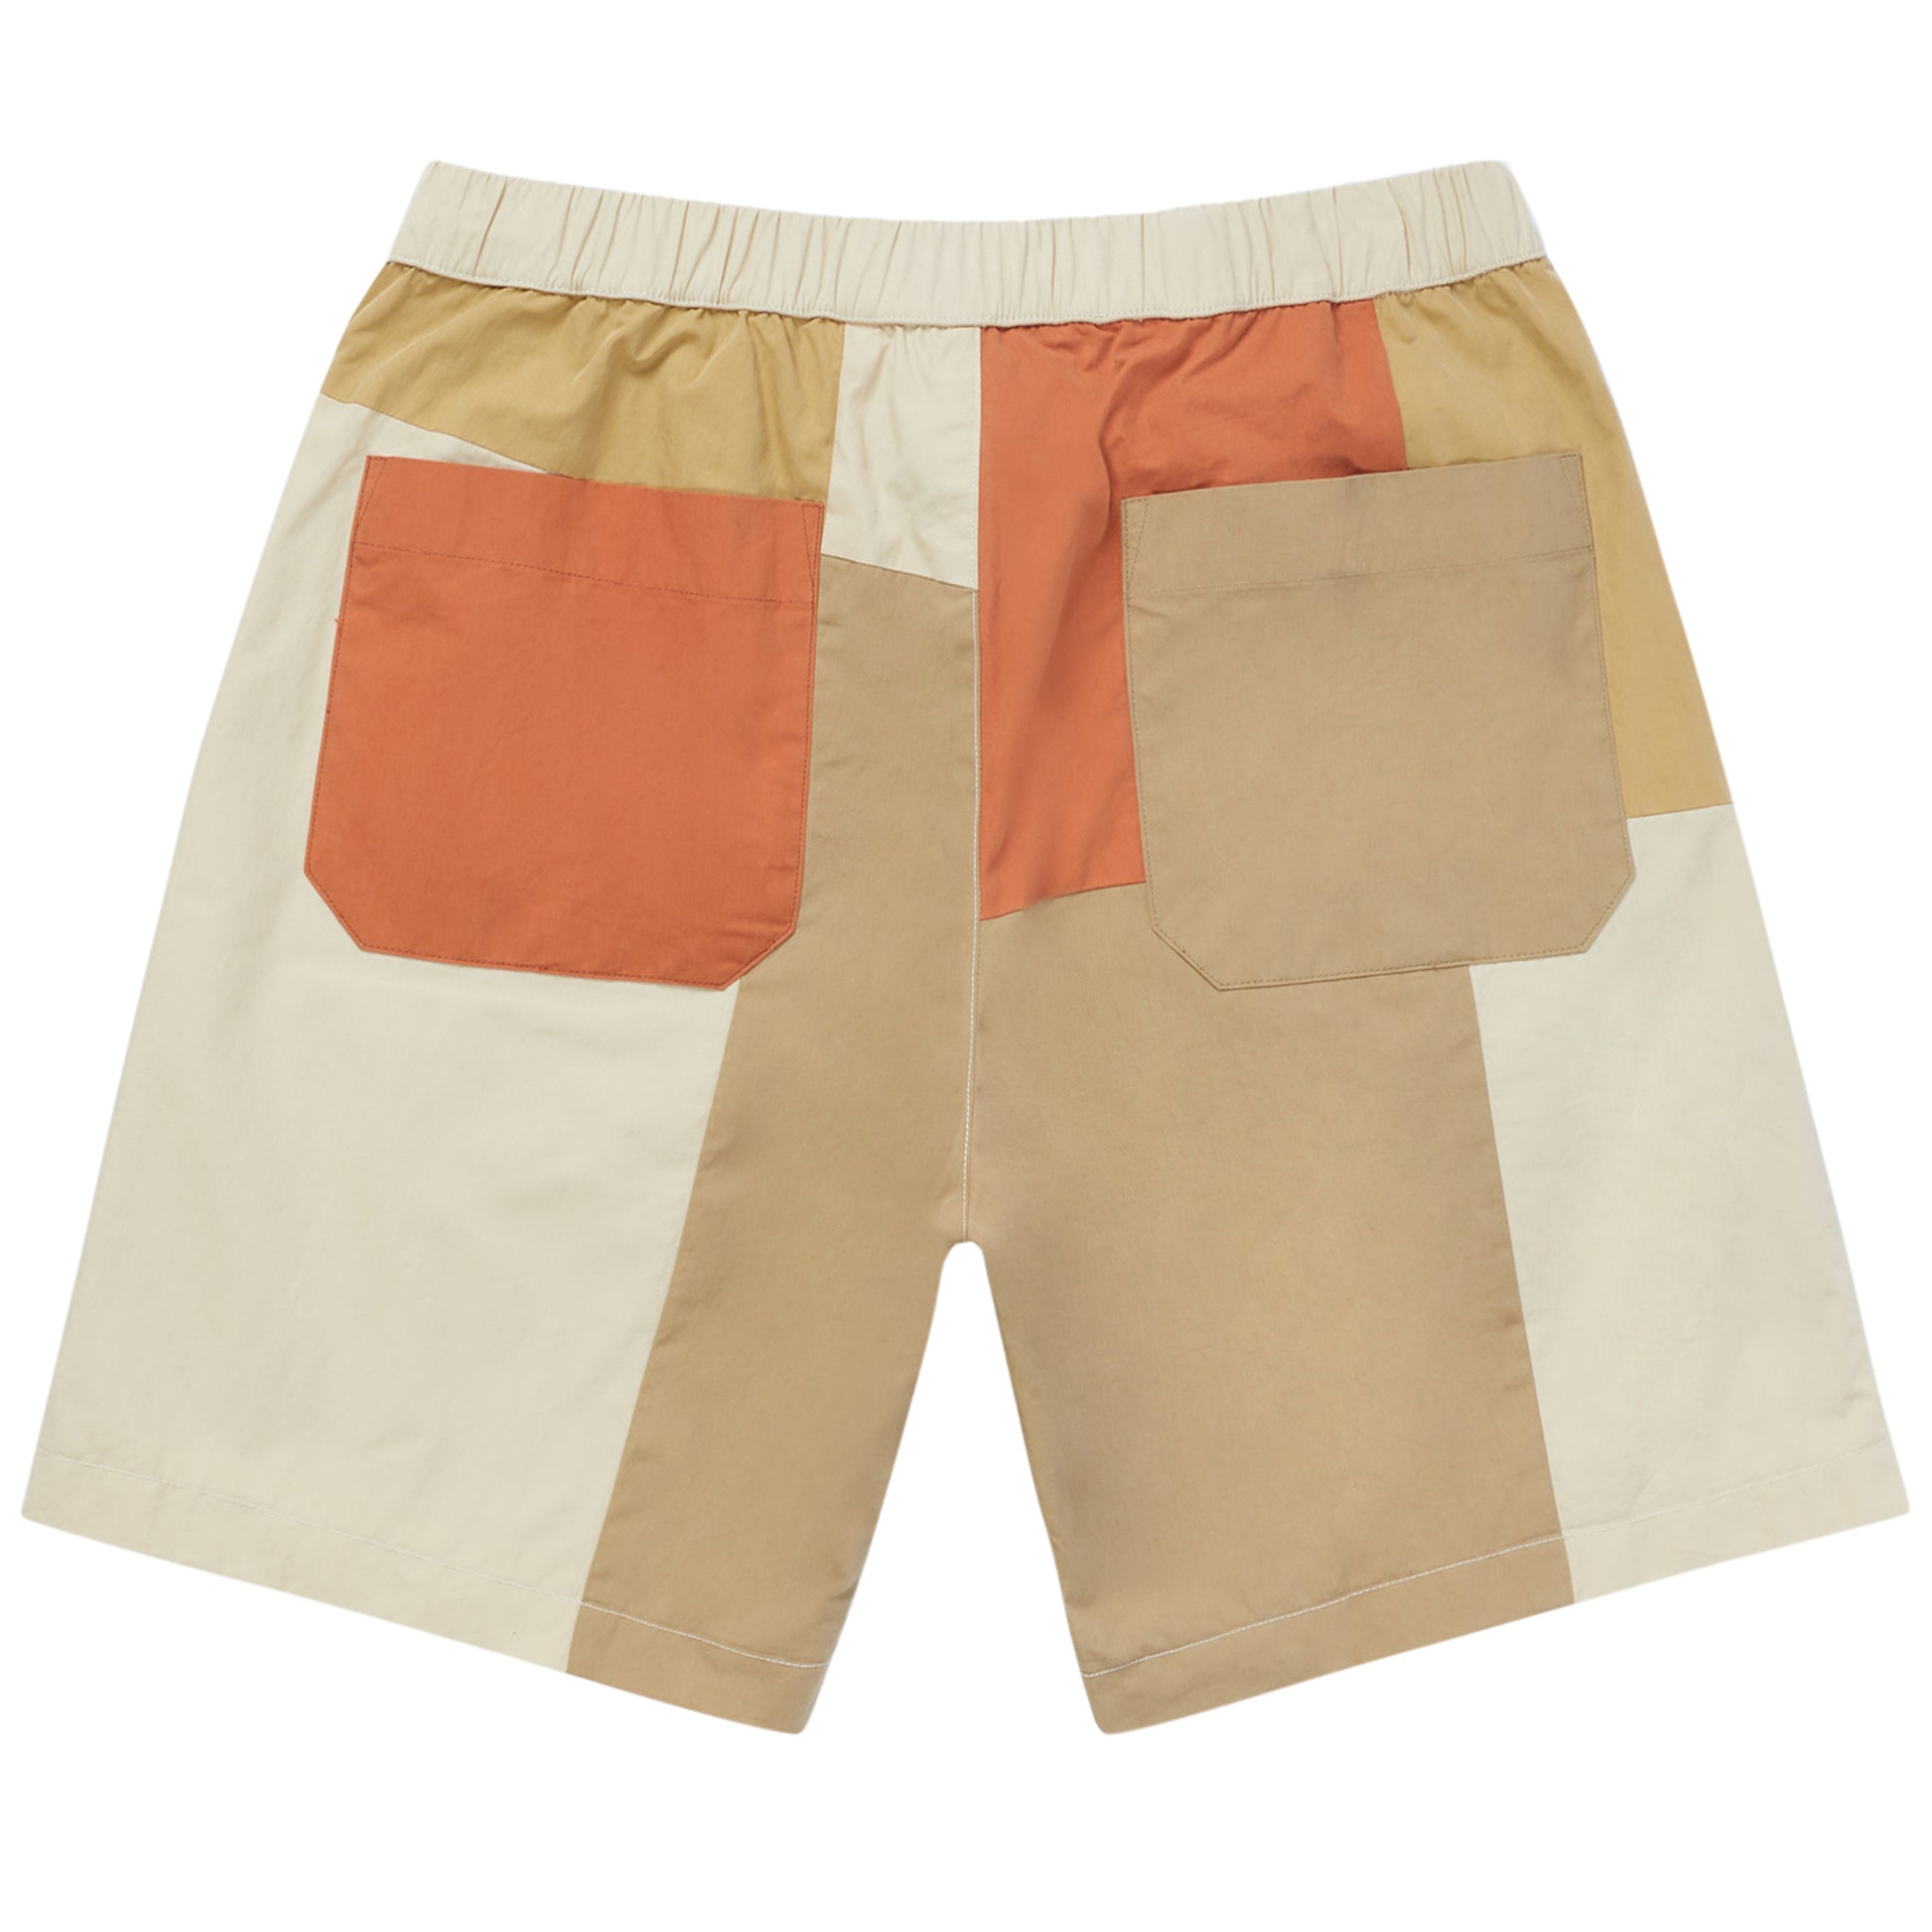 MARKET clothing brand GORP PATCHWORK TECH SHORTS. Find more graphic tees, sweatpants, shorts and more bottoms at MarketStudios.com. Formally Chinatown Market. 